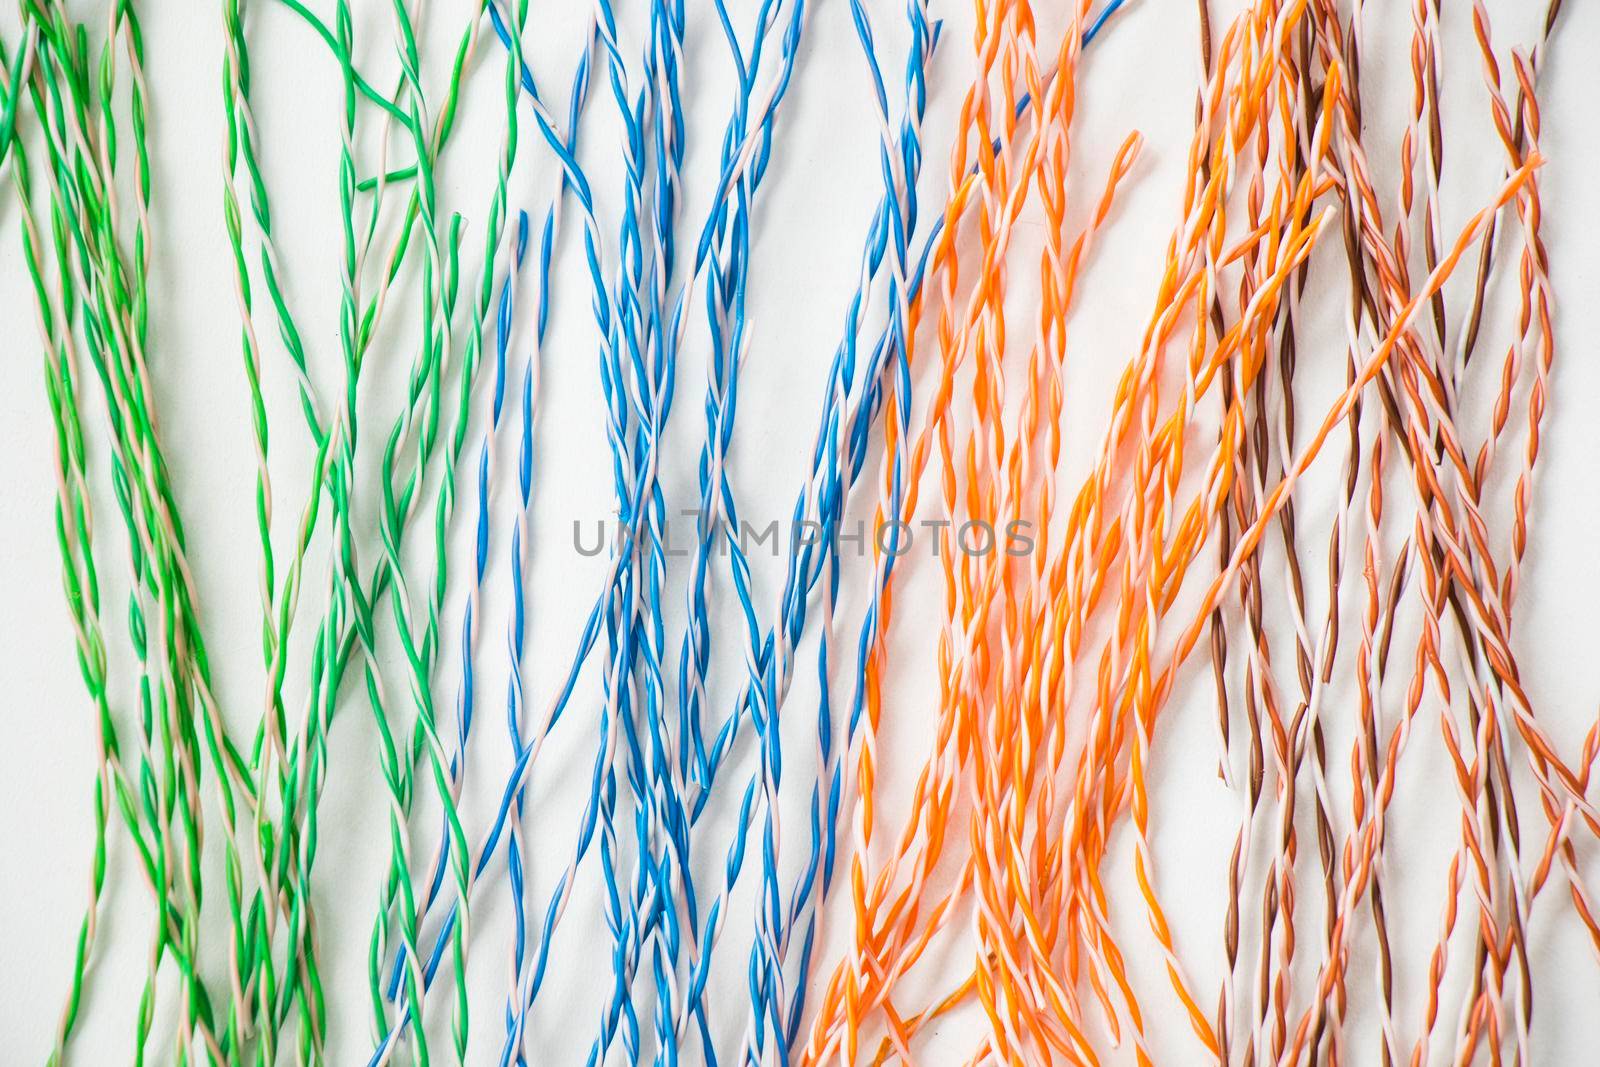 Internet cable on the white background, high angle view